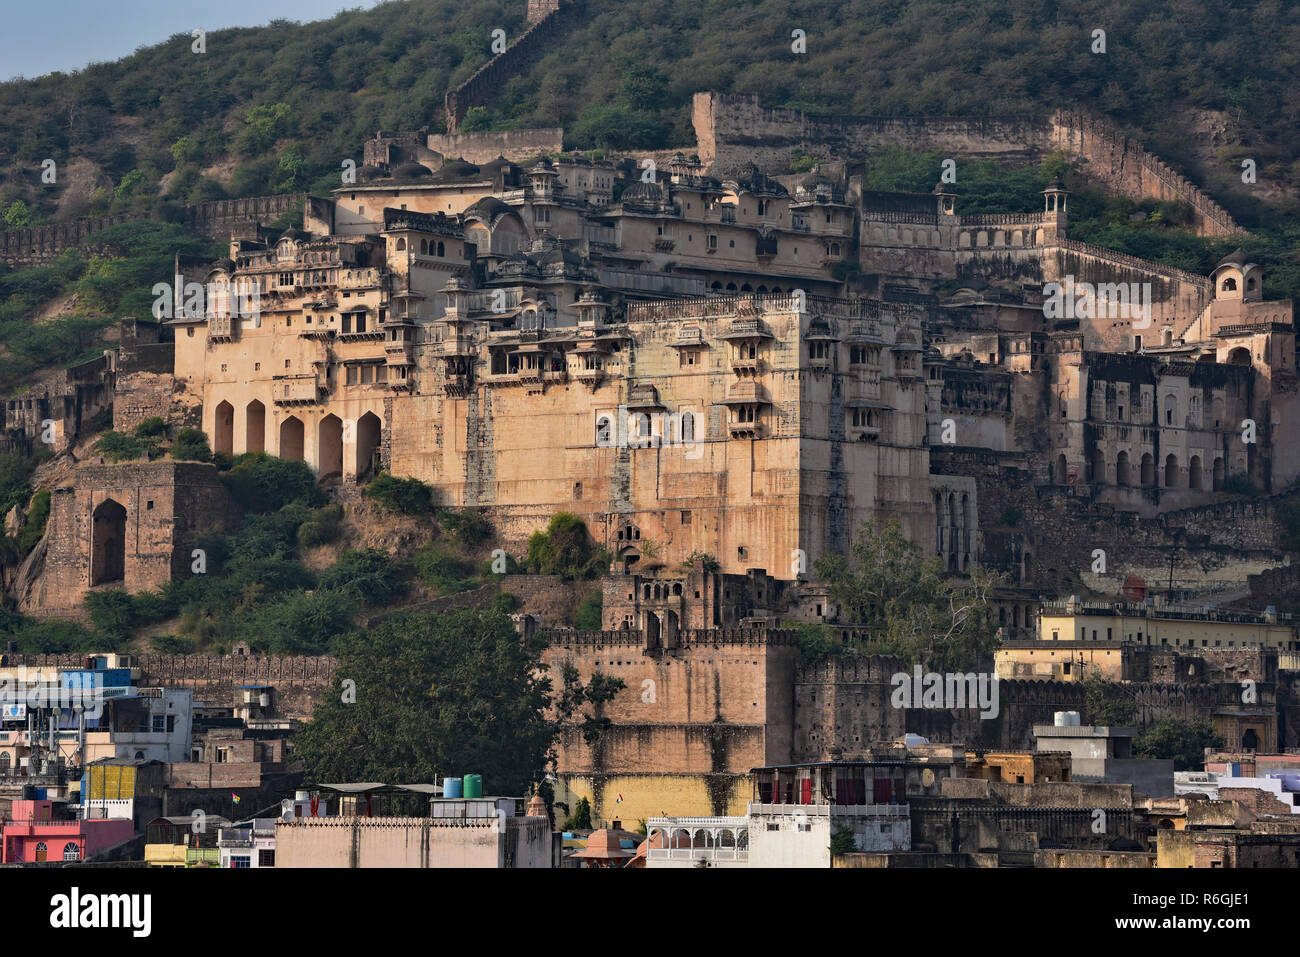 Garh Palace, the jewel of Rajasthan, a fine example of Rajput architecture, housing some superb frescoes, Bundi, Western India, Asia. Stock Photo